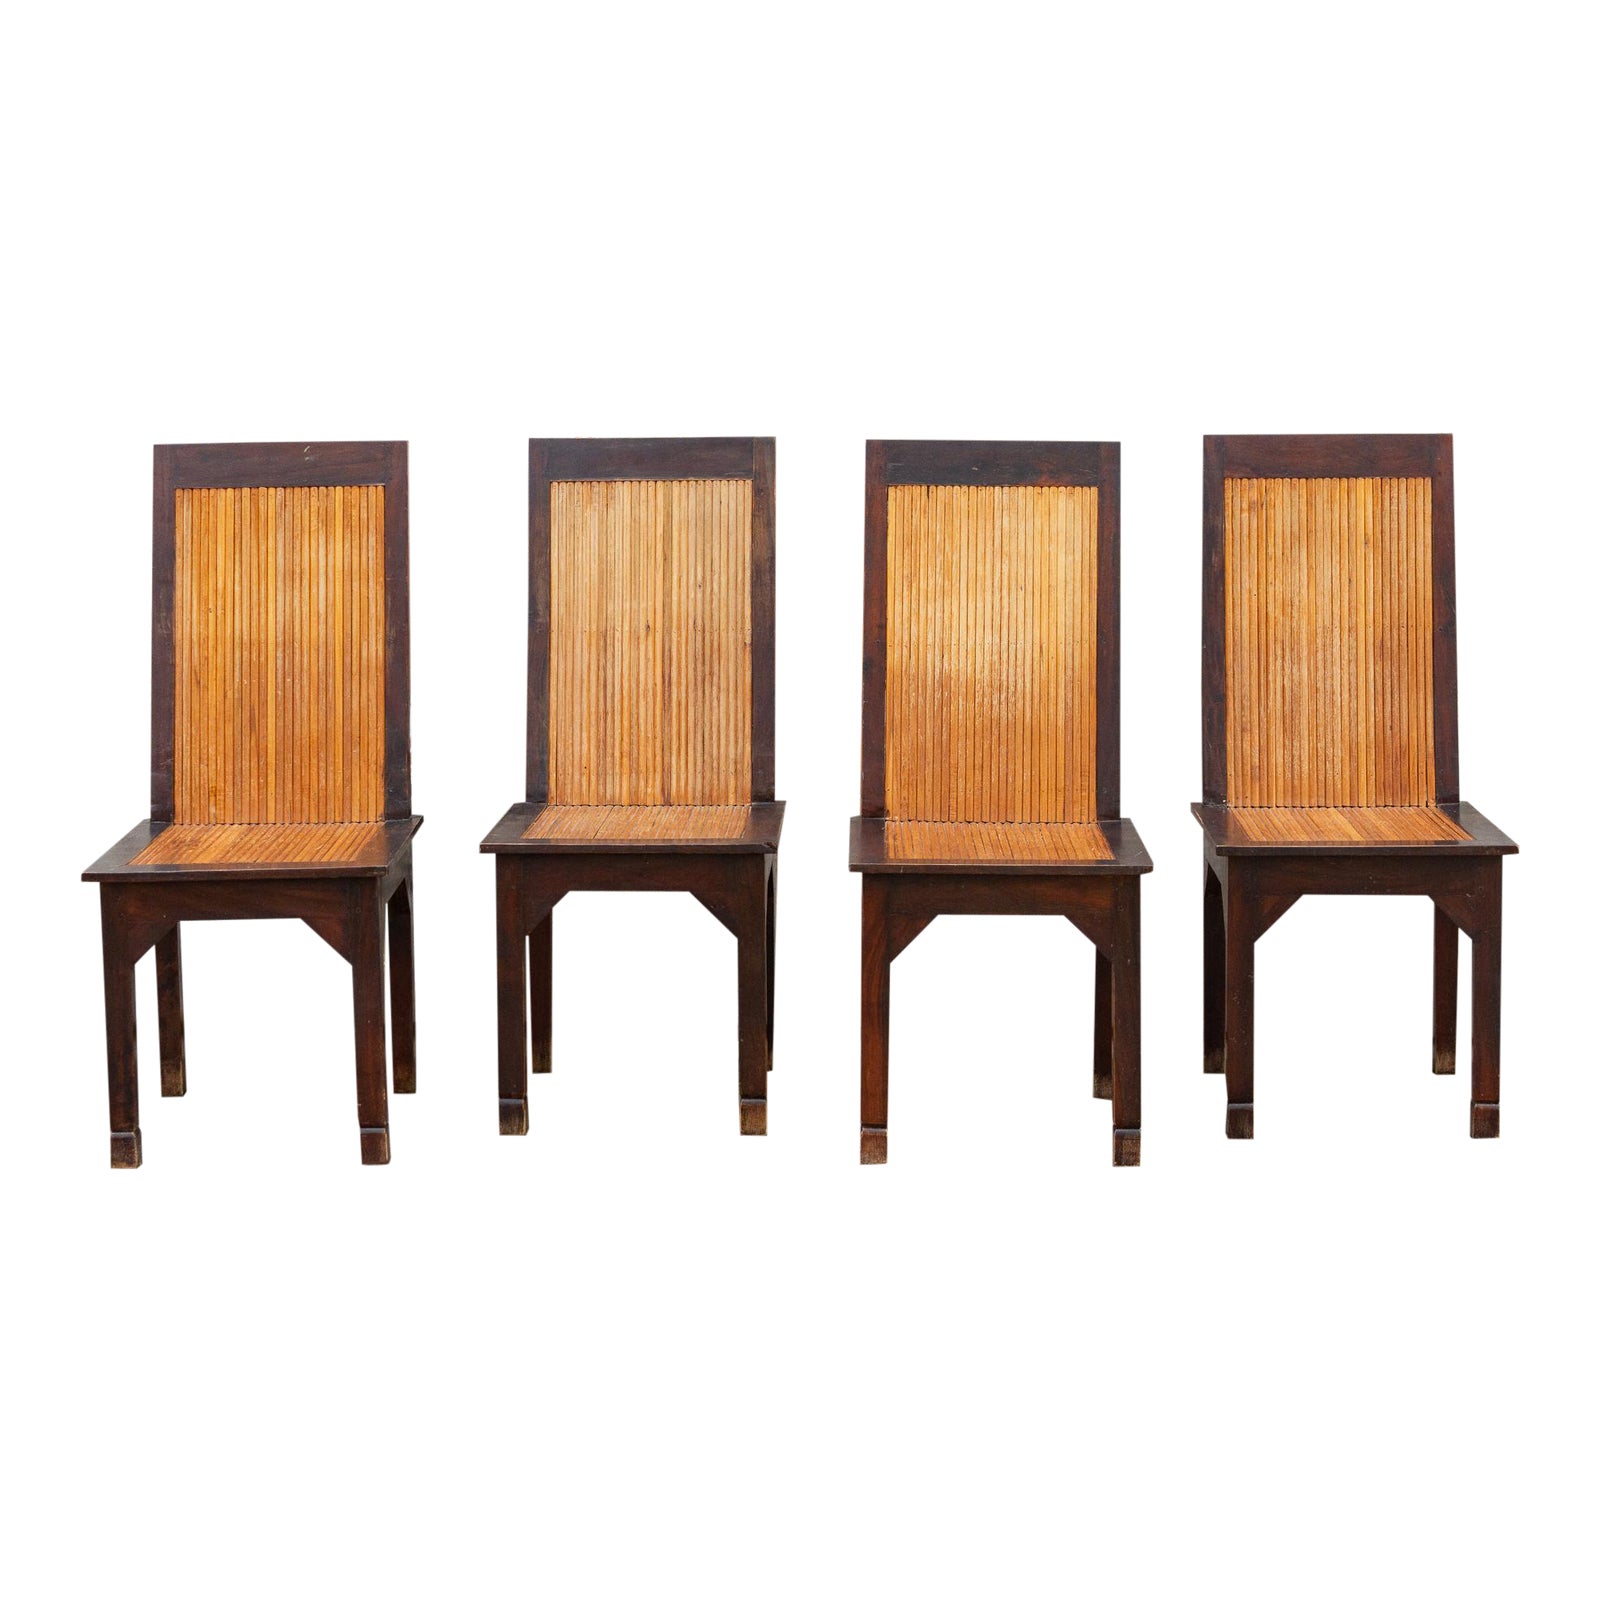 Set of Four Tall Bamboo & Wood Chairs~P77630492